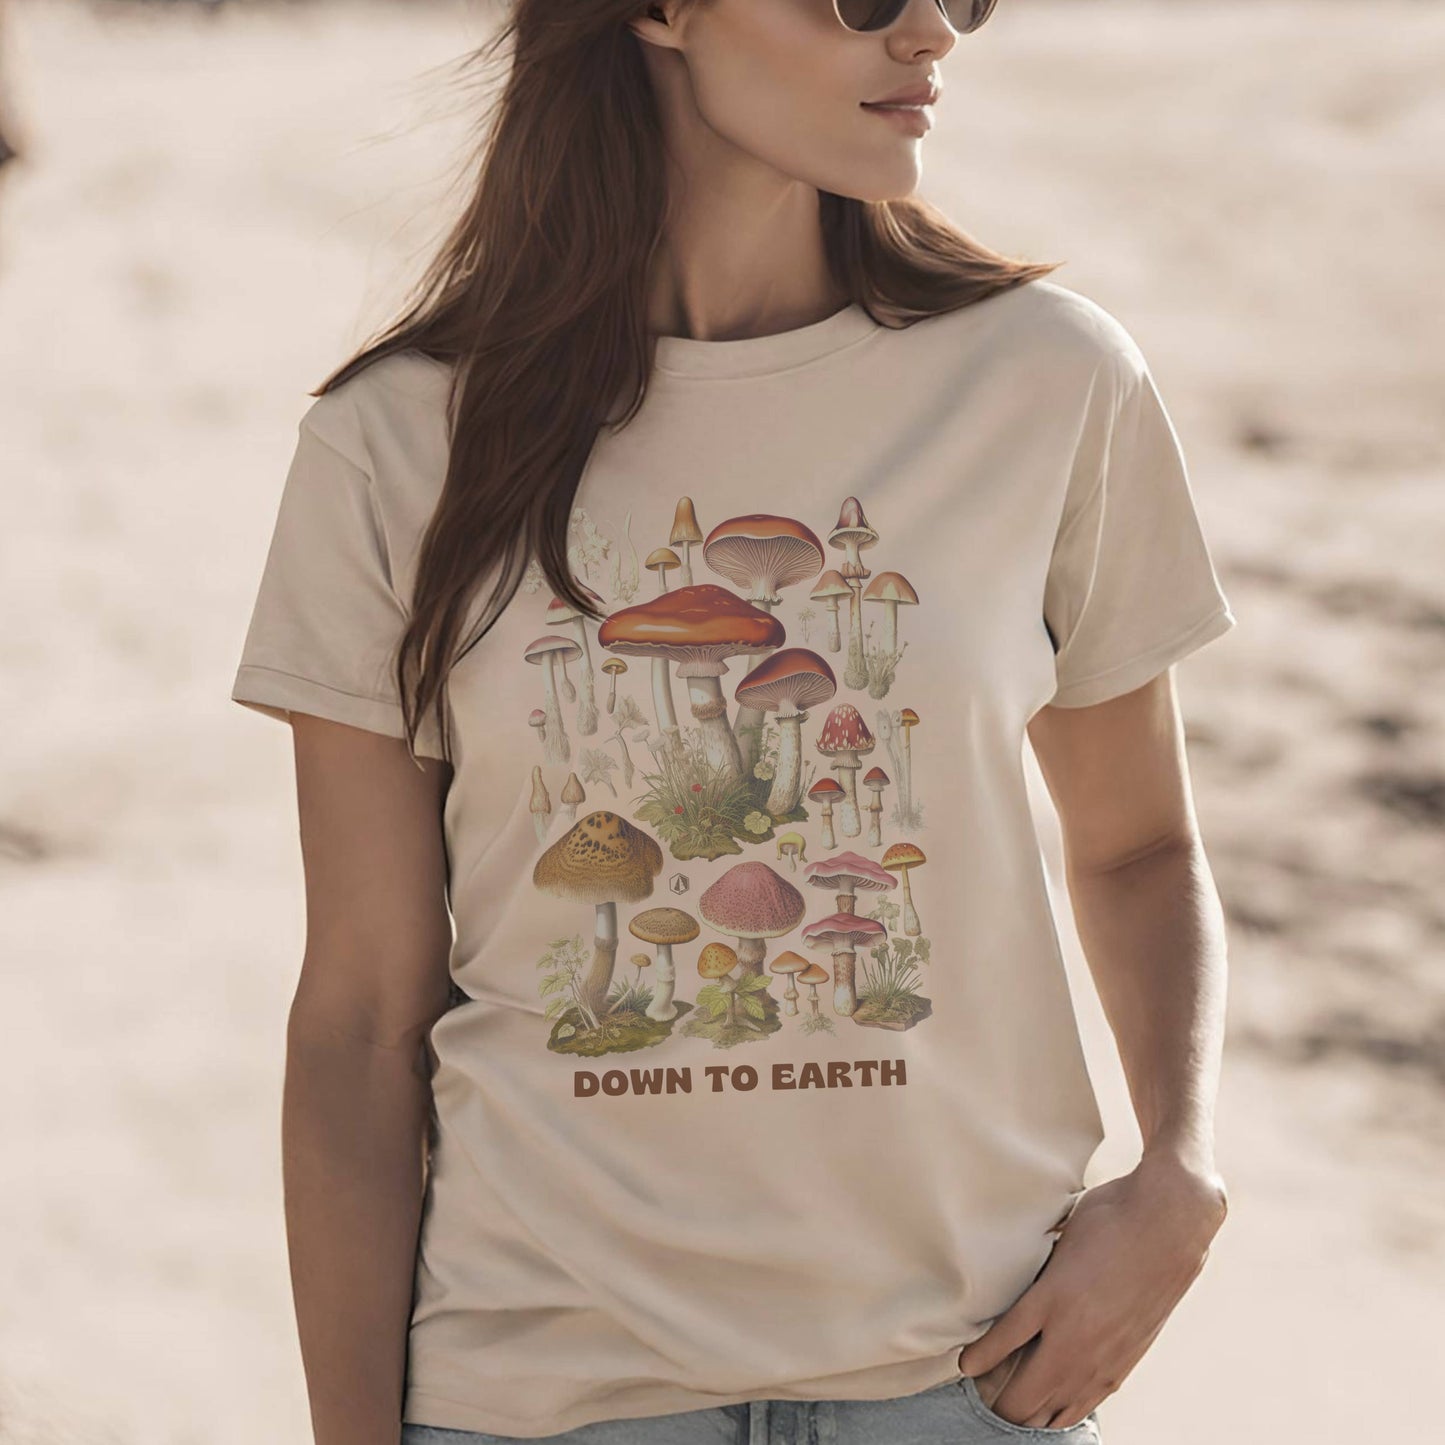 Down to Earth | Shirt That Protects Outdoor Spaces